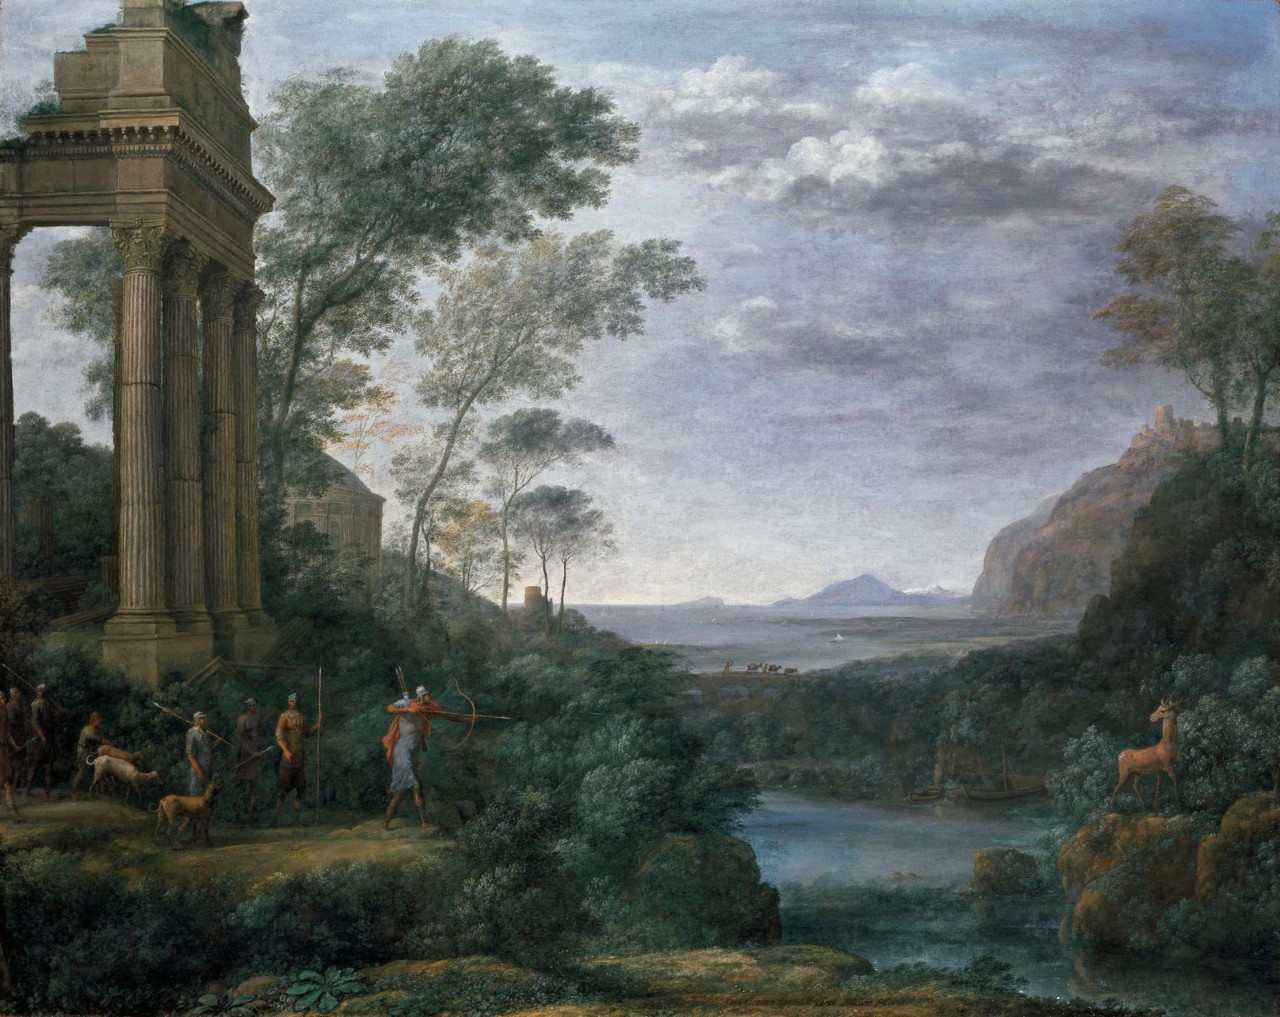 Painting by Claude Lorrain showing Ascanius shooting the stag of Sylvia, a landscpe paiting whowing a group of hunters on one side of a river and the stag on the other.